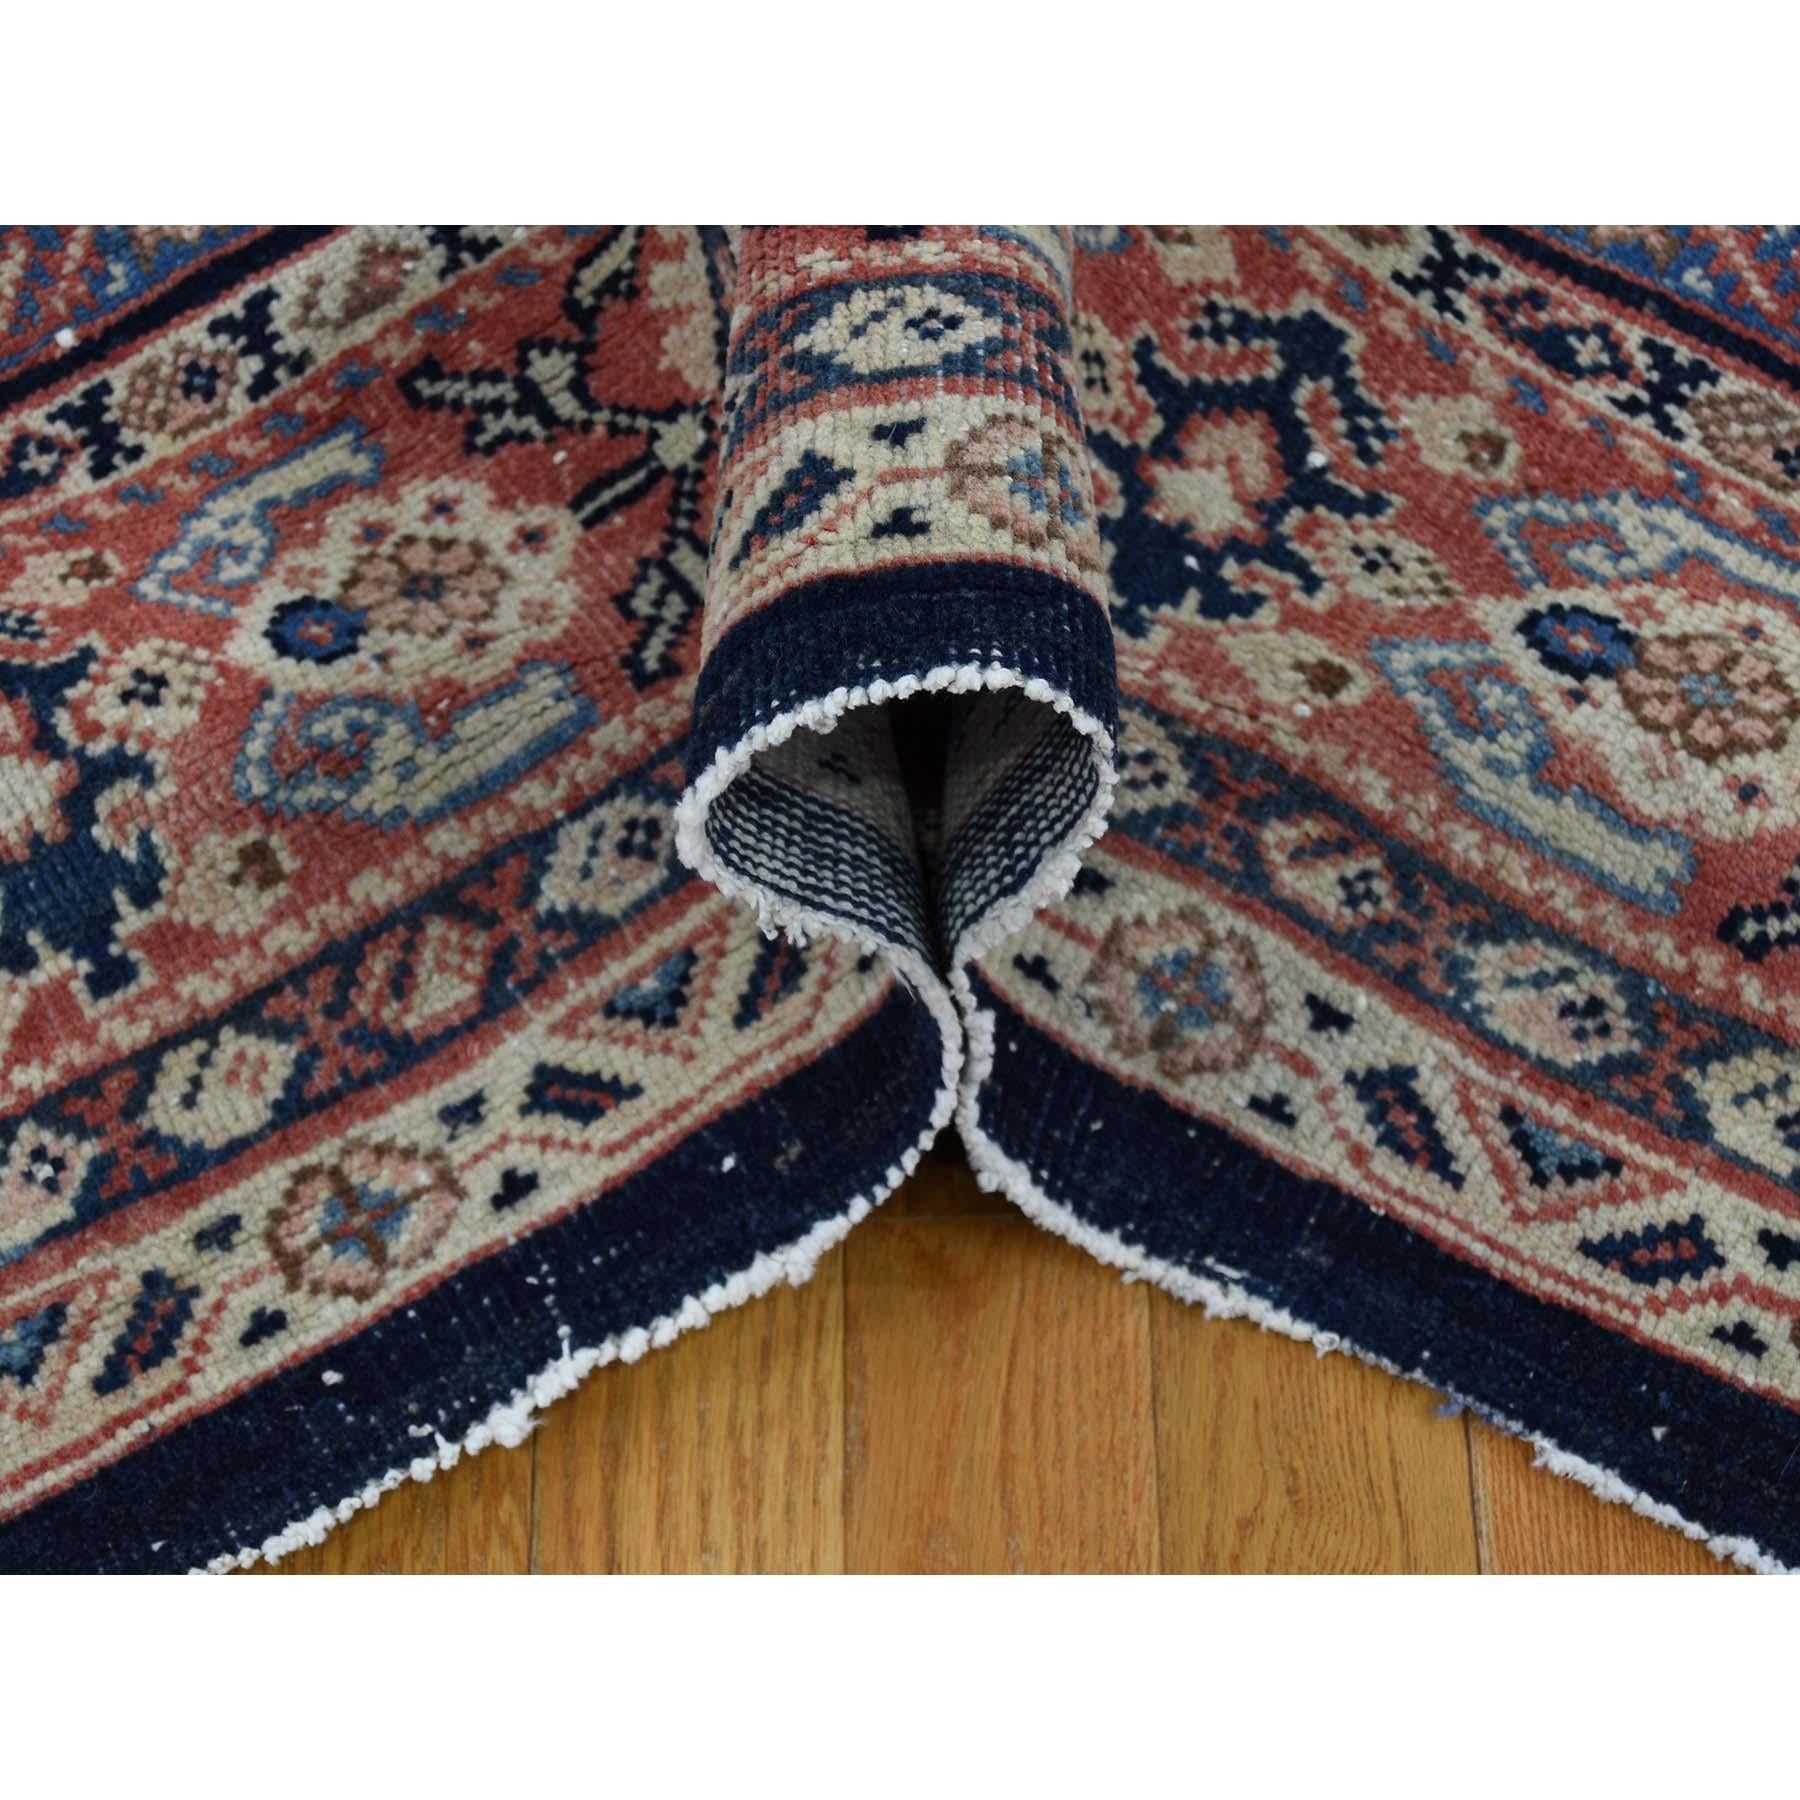 Wool Antique Persian Mahal Even Wear Navy Blue Hand-Knotted Oriental Rug